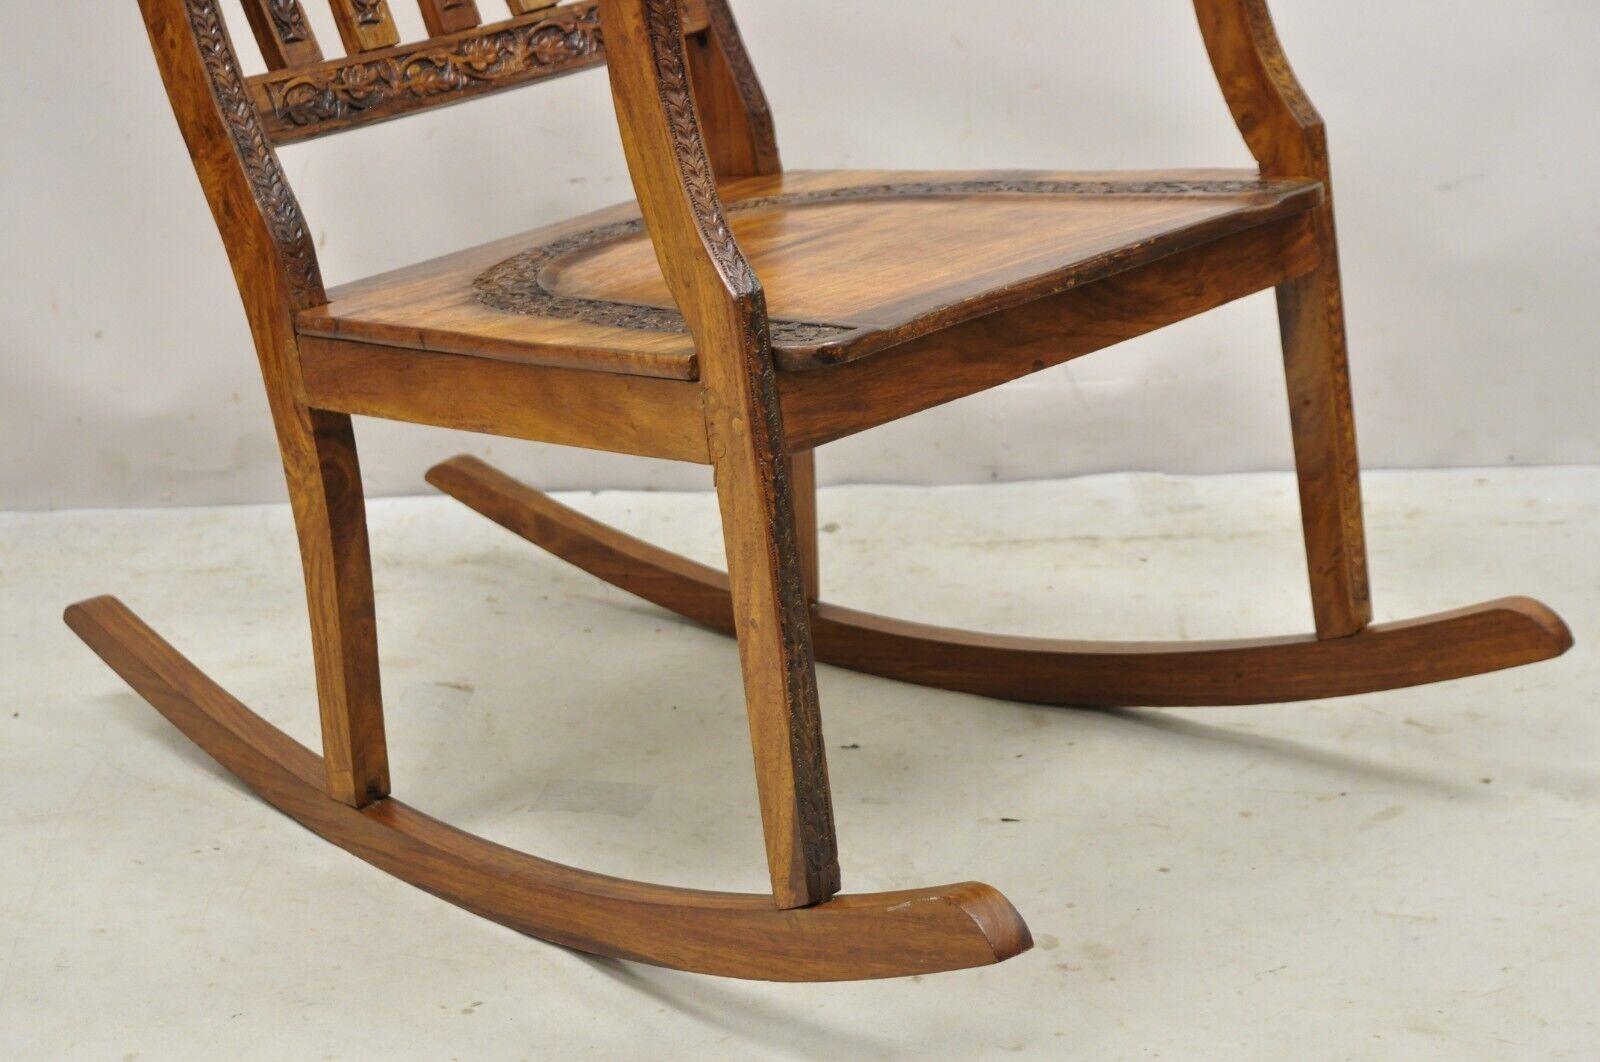 20th Century Vintage Anglo Indian Carved Teak Wood Rocking Chair Rocker For Sale